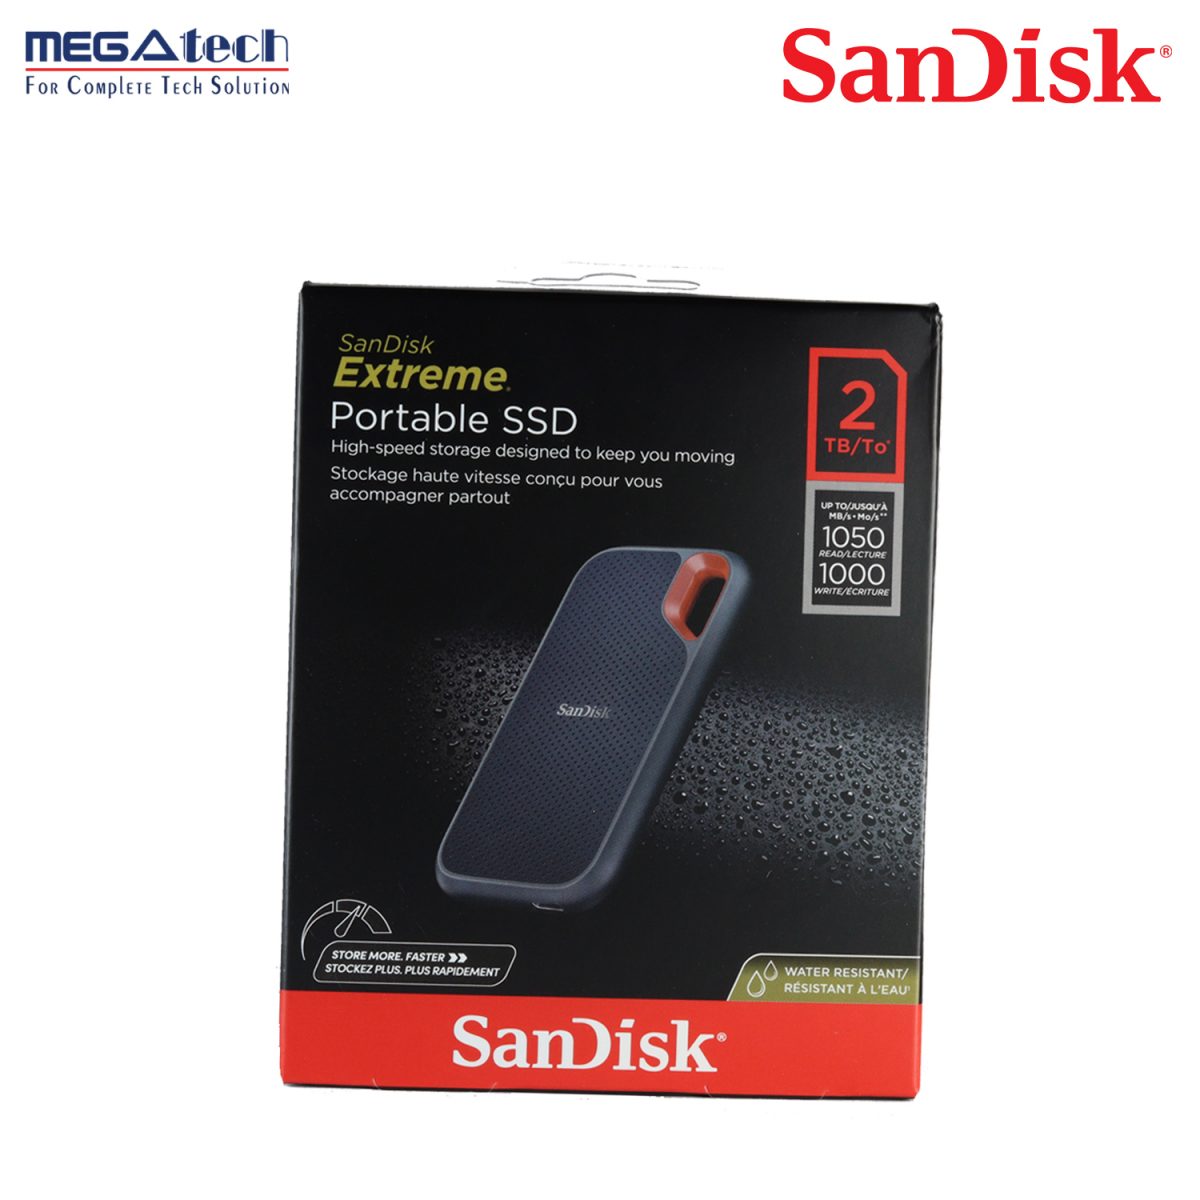 SanDisk Portable SSD 2 TB  1000MB/s R, for PC & MAC, Color Black